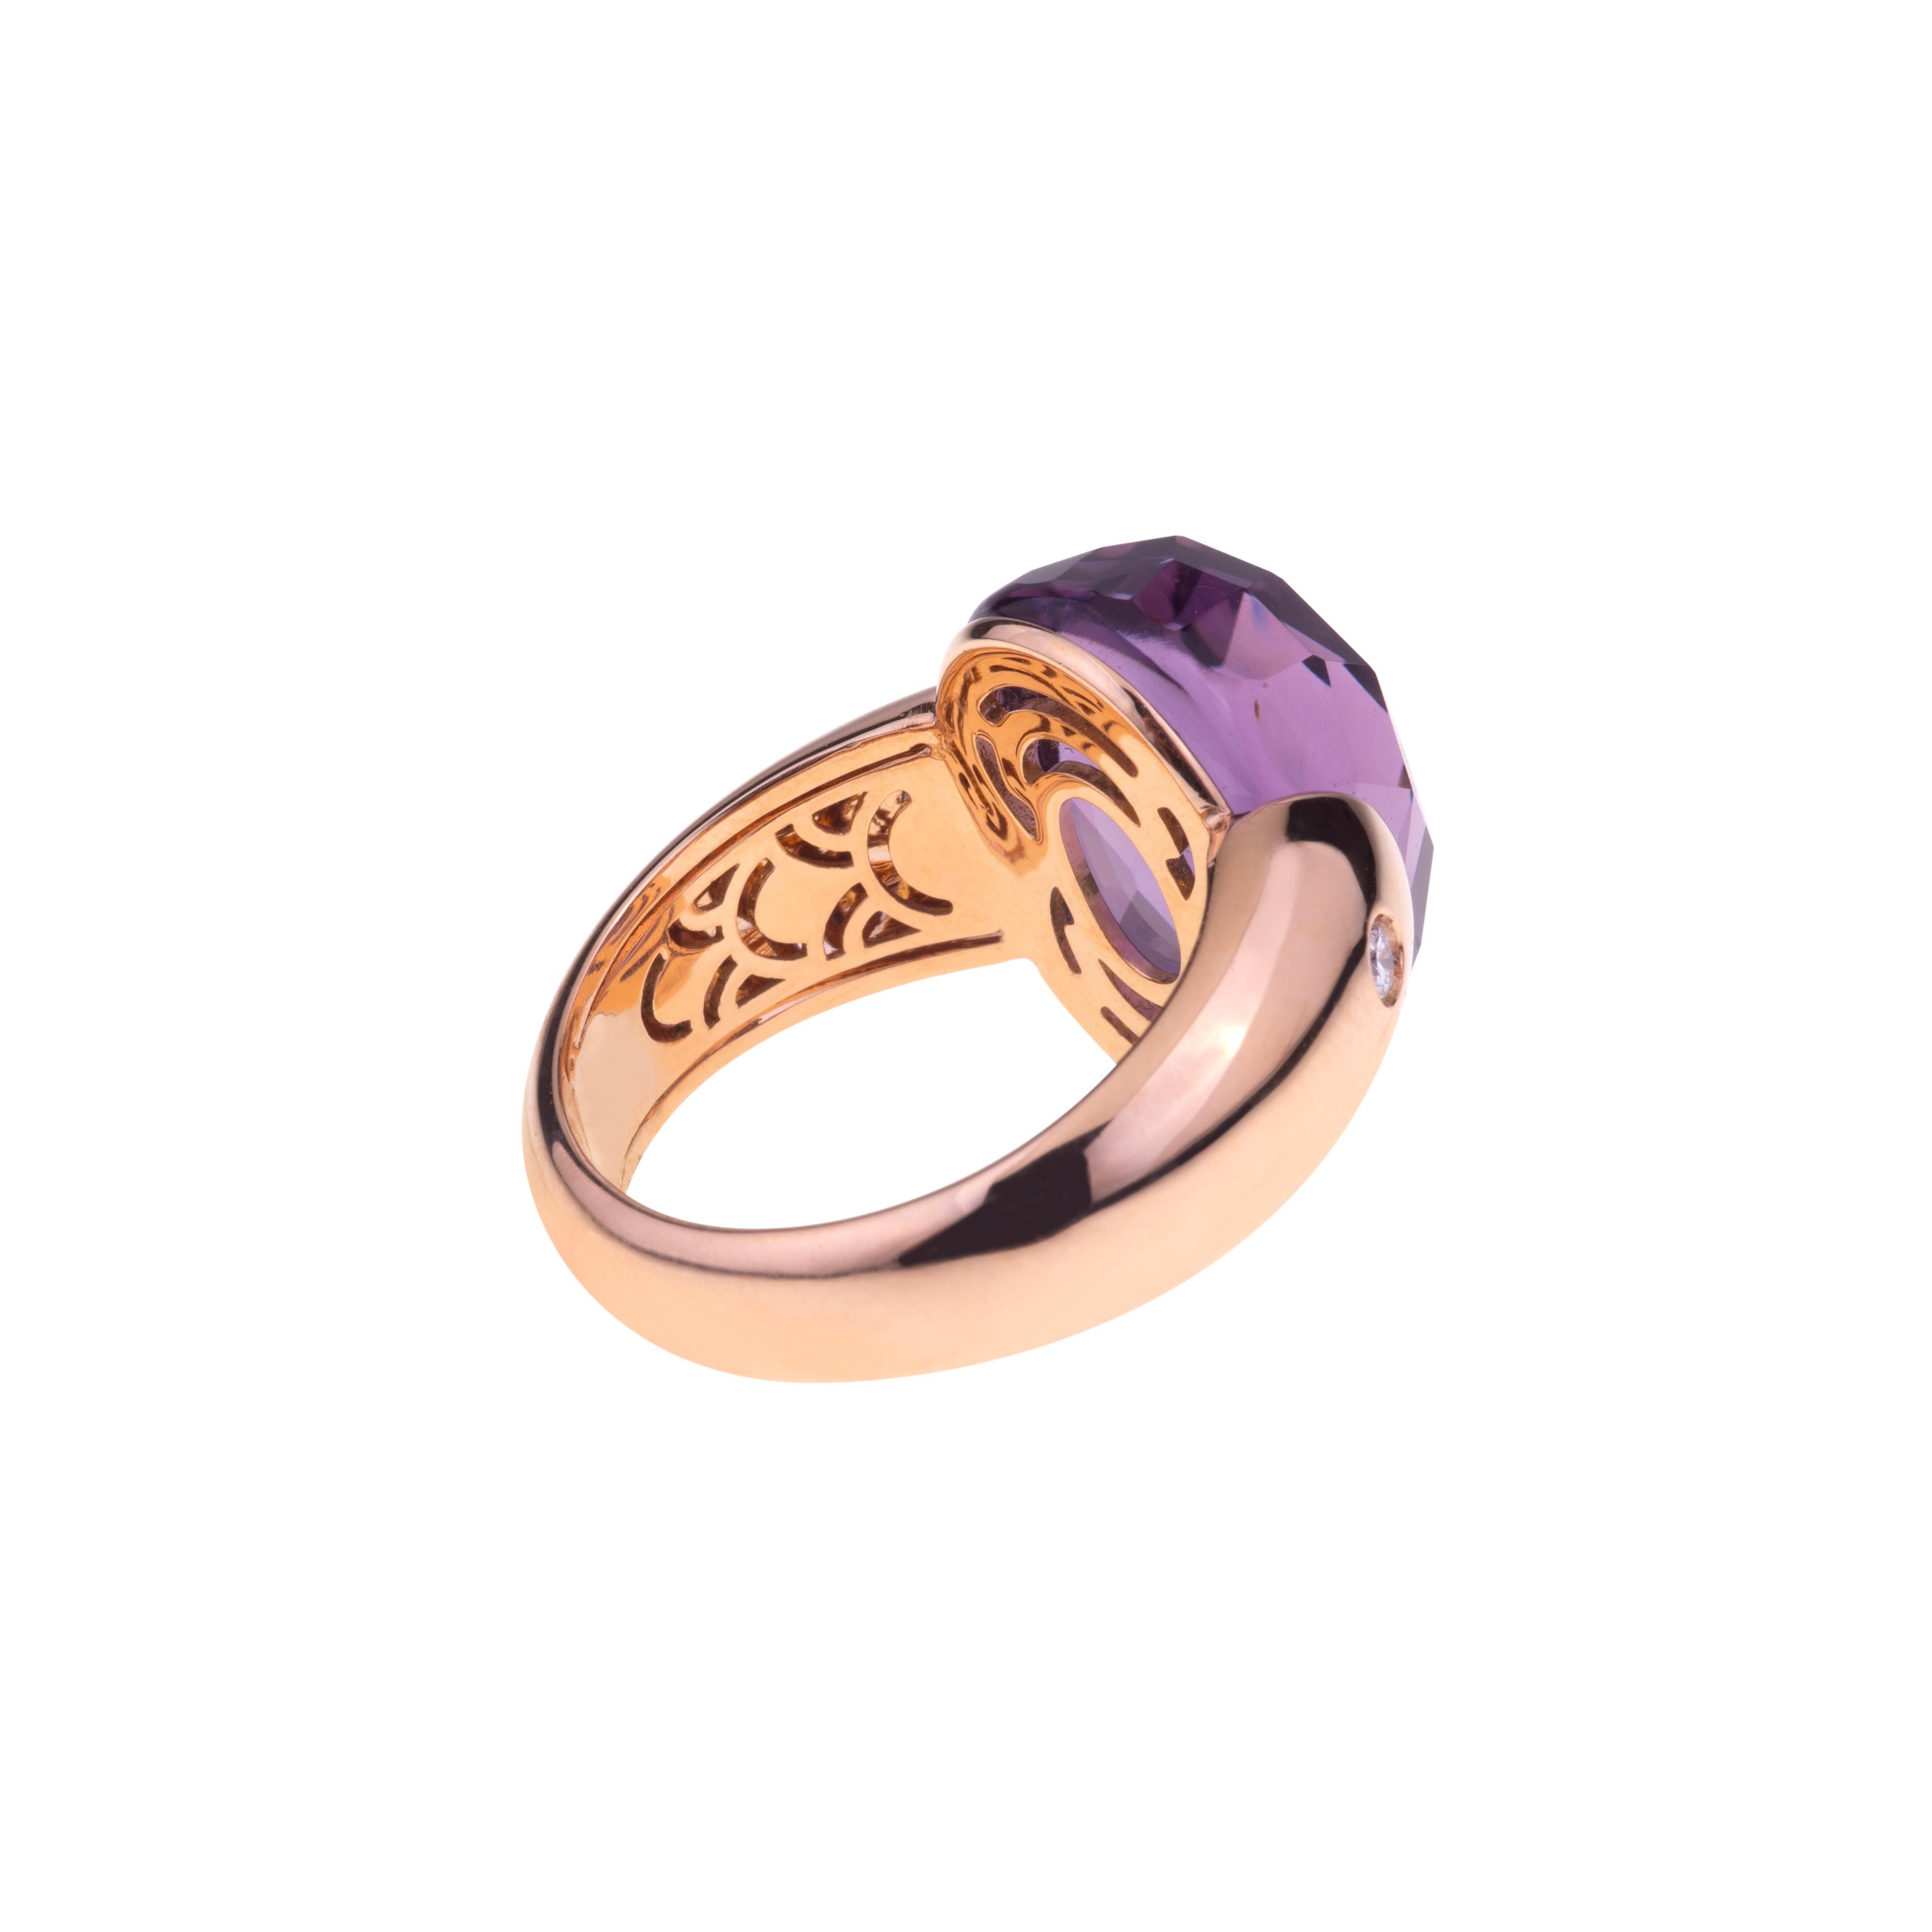 Women's Embrace Collection by Angeletti. Rose Gold Ring With Amethyst and Diamonds For Sale